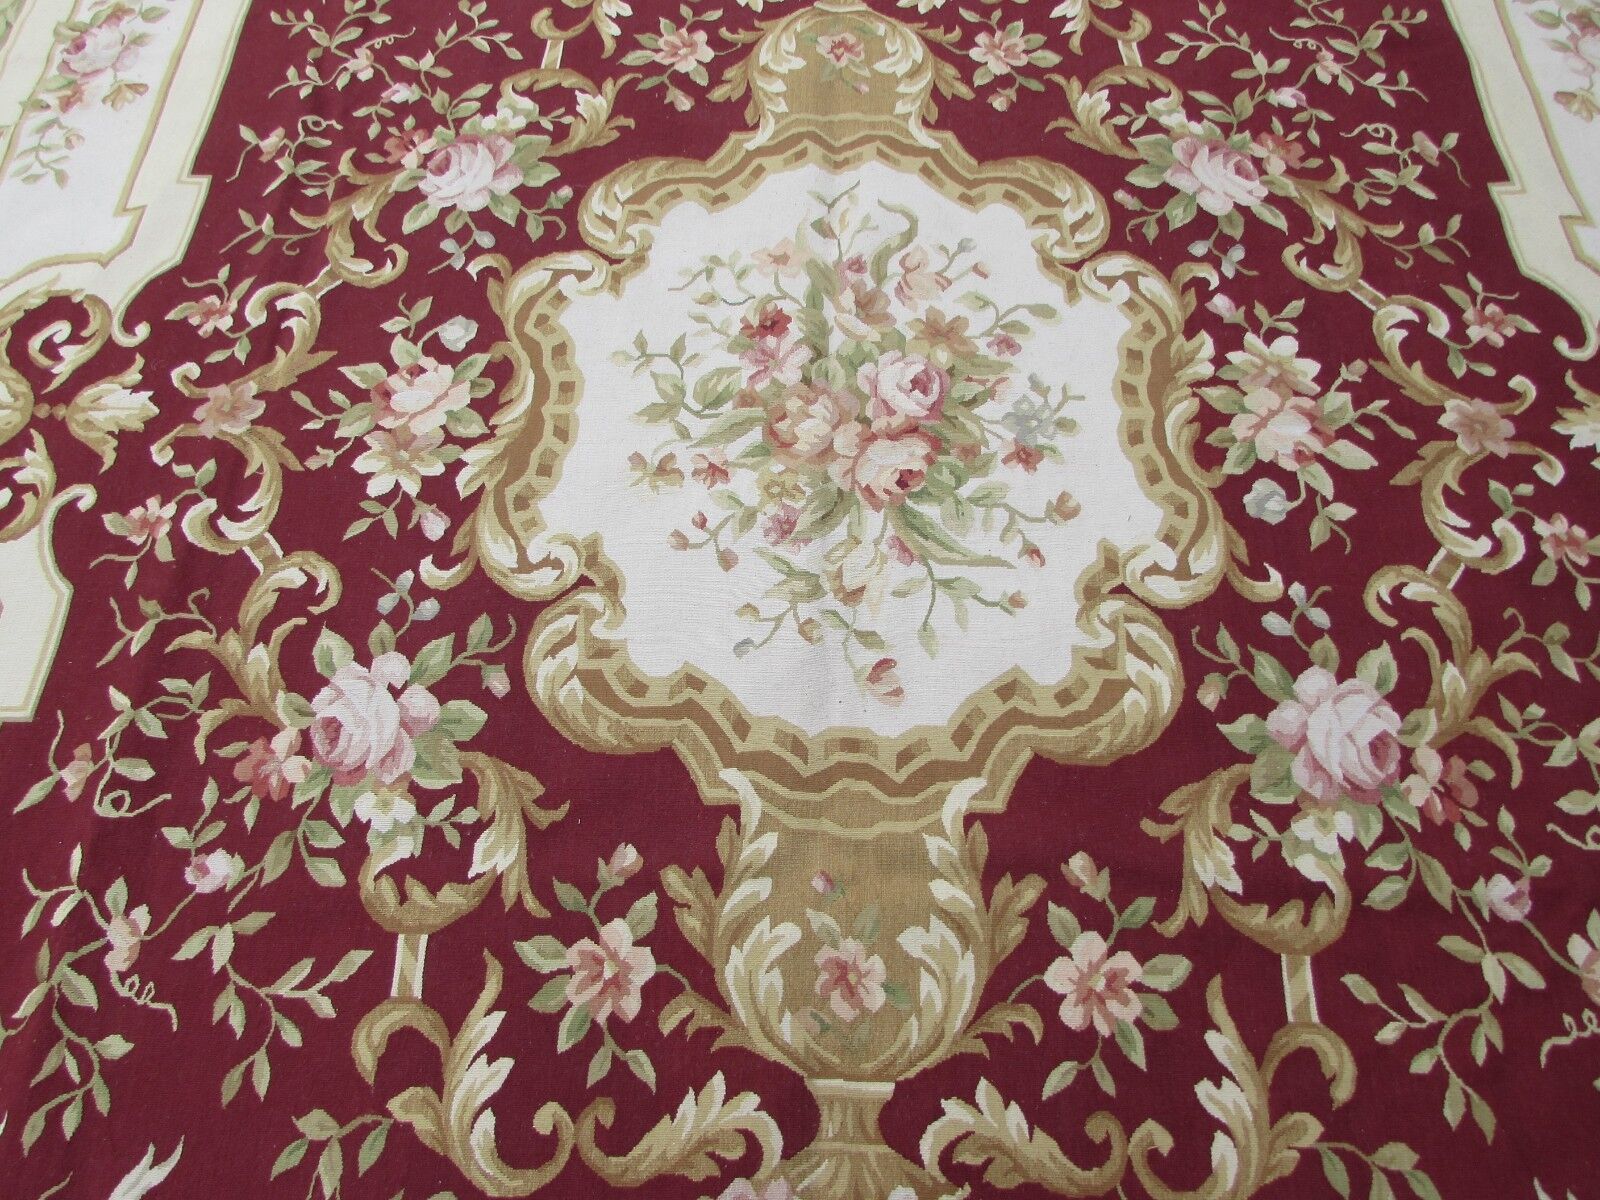 Handmade vintage French Aubusson rug in traditional floral design in burgundy and beige shades. This rug has been made in the end of 20th century and in original good condition.